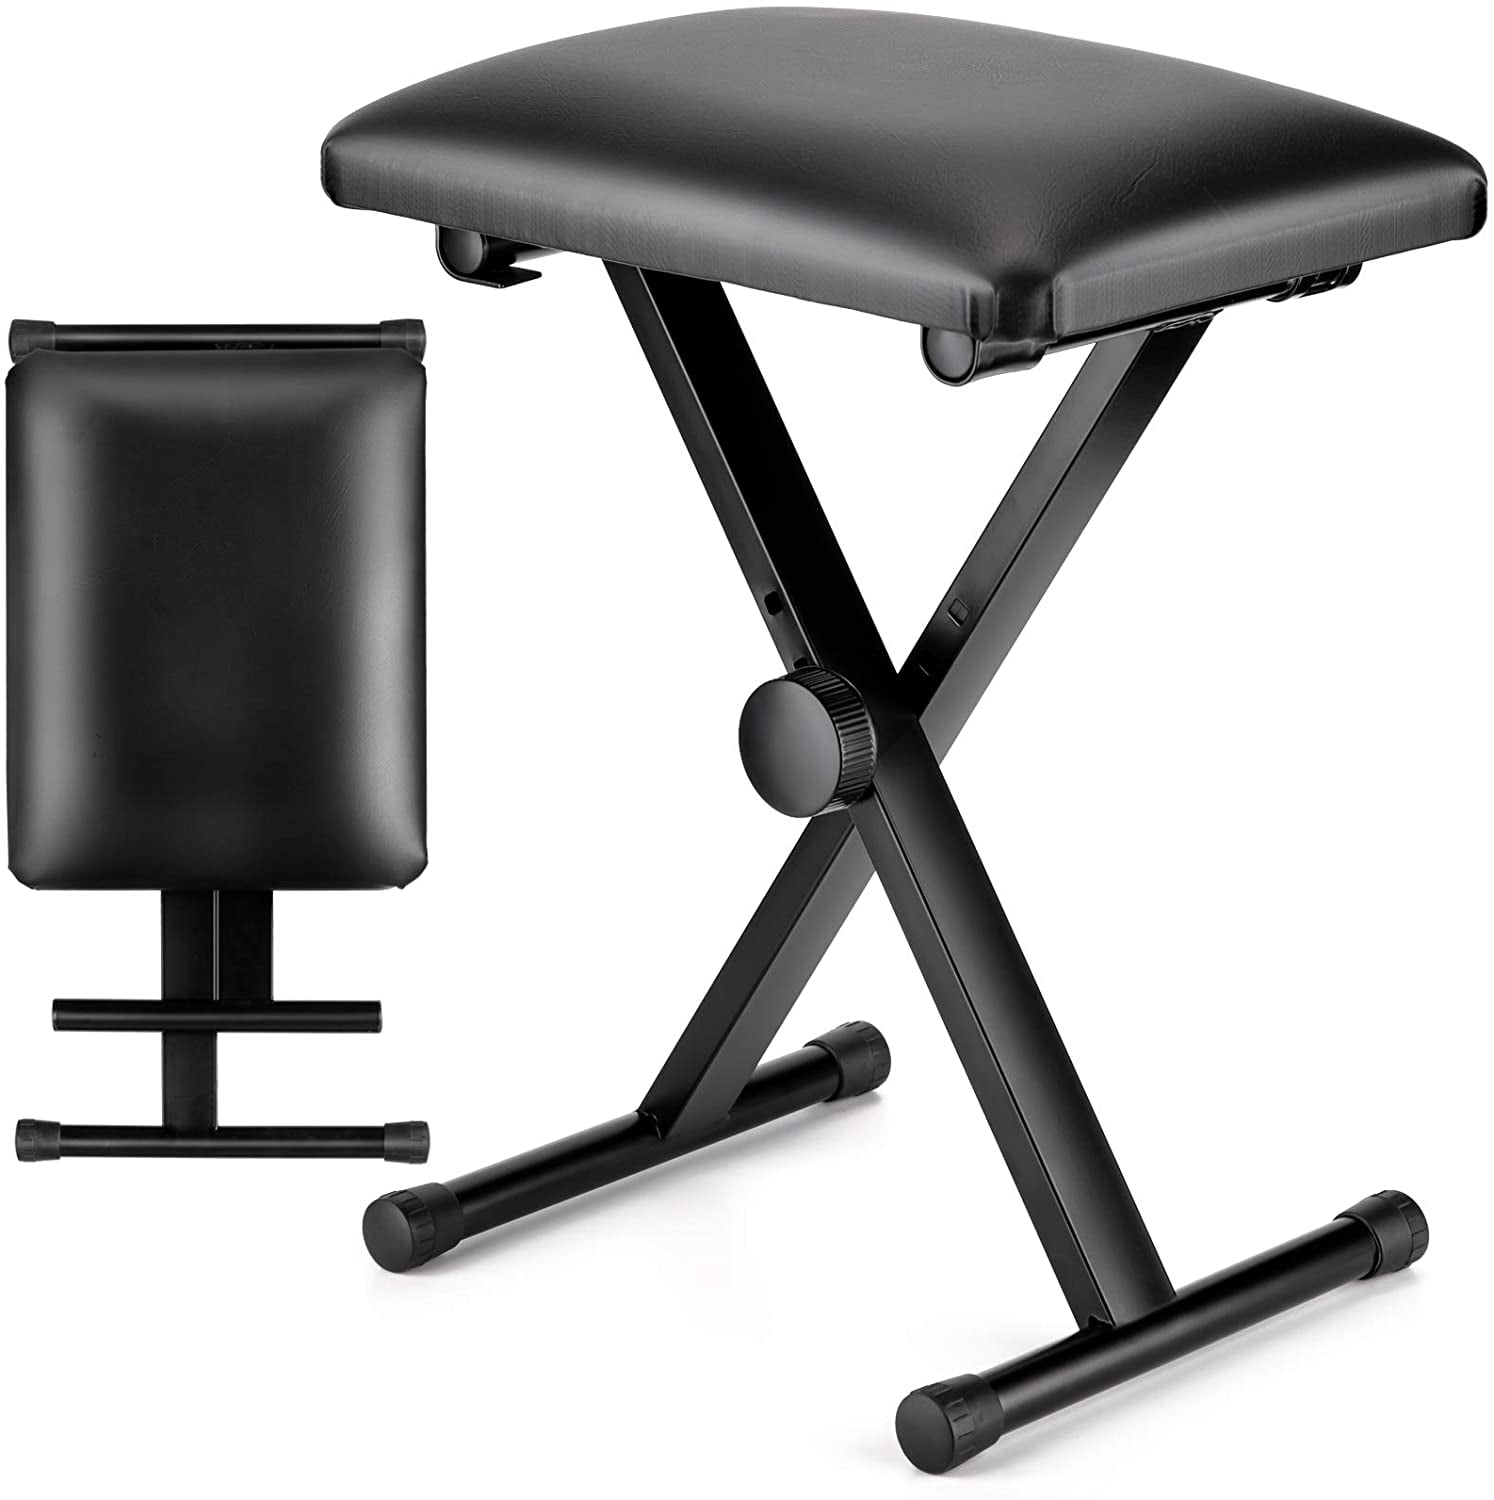 X-Style Adjustable Padded Keyboard Bench Piano Bench Stool Seat for Kids and Adults Black 